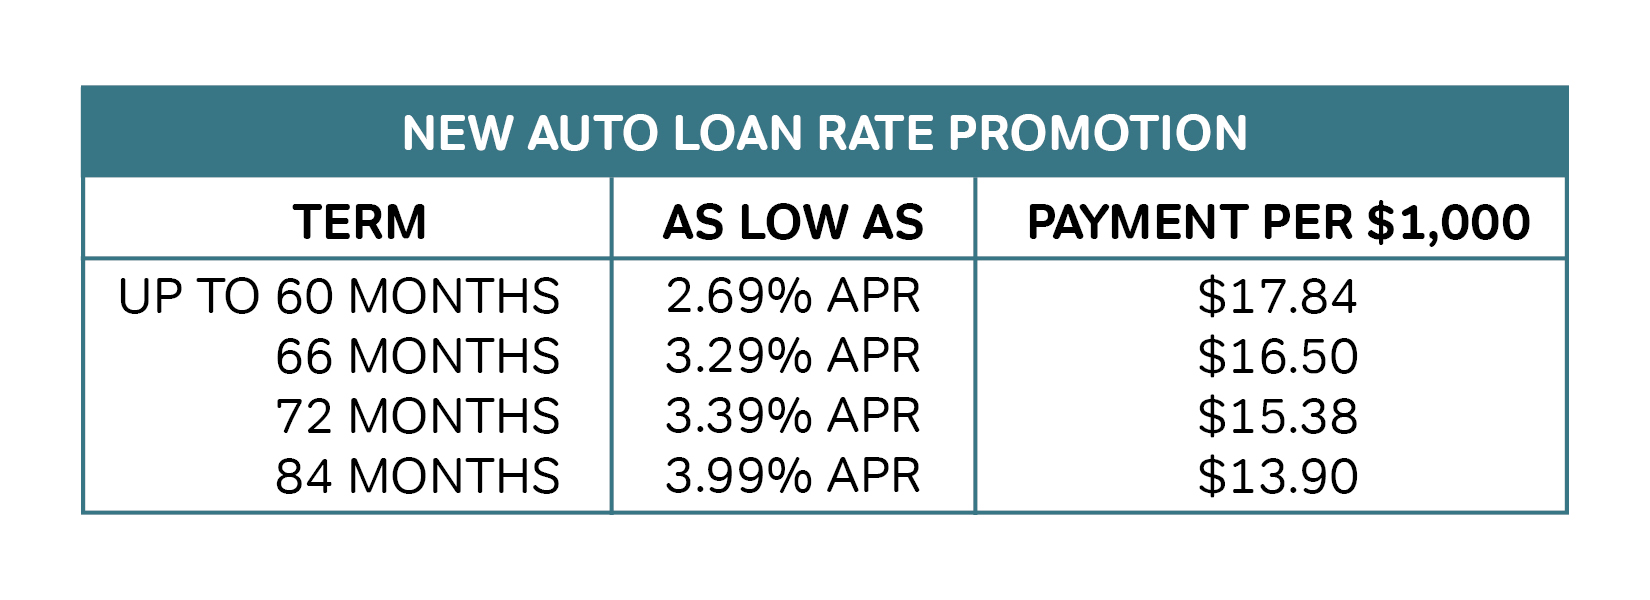 New Auto Loan Rate Promotion  Members First Credit Union